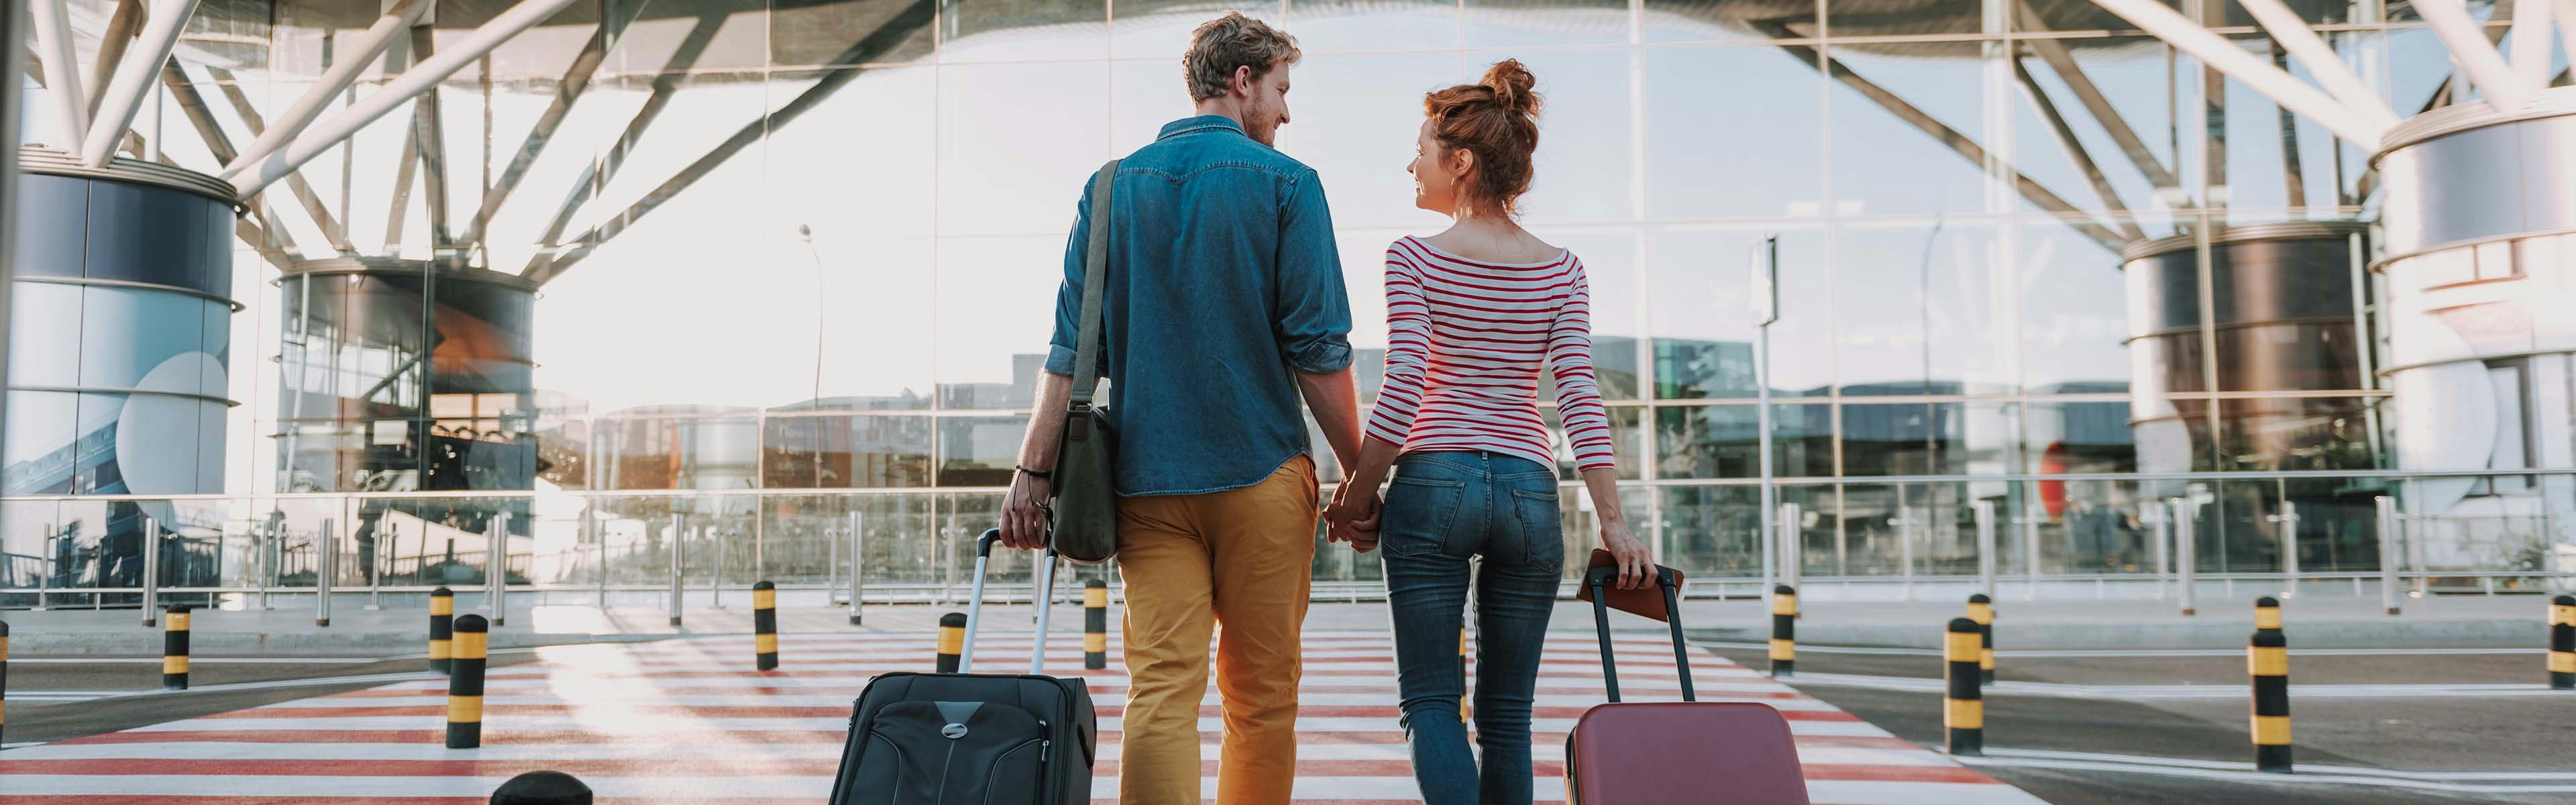 Young Couple walking with suitcases into airport leaving on vacation